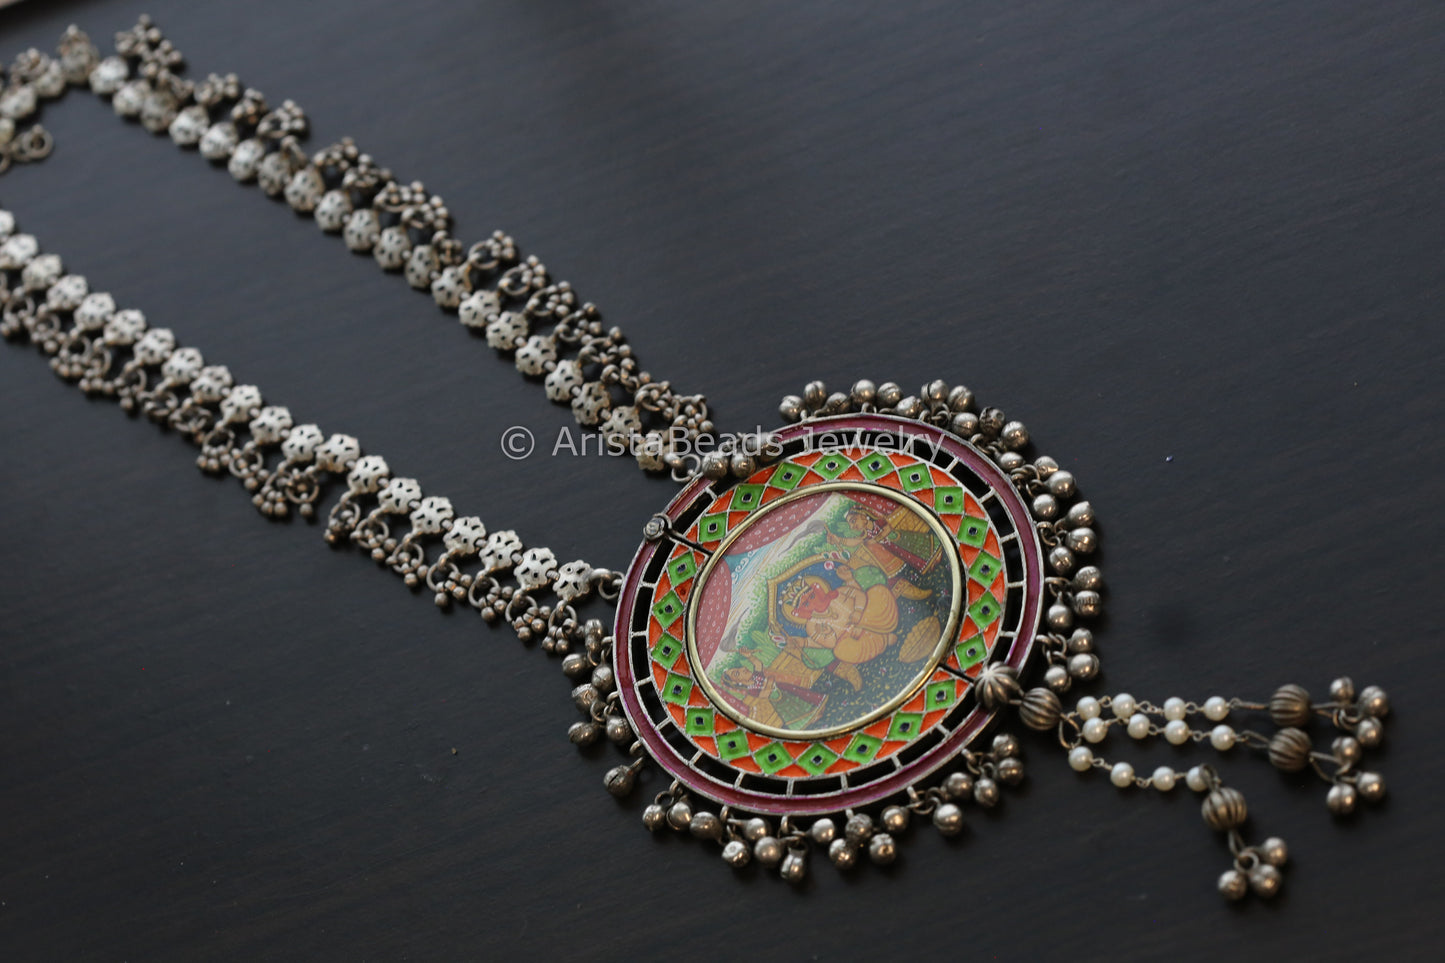 Oxidized Hand-Painted Enamel Necklace - Red